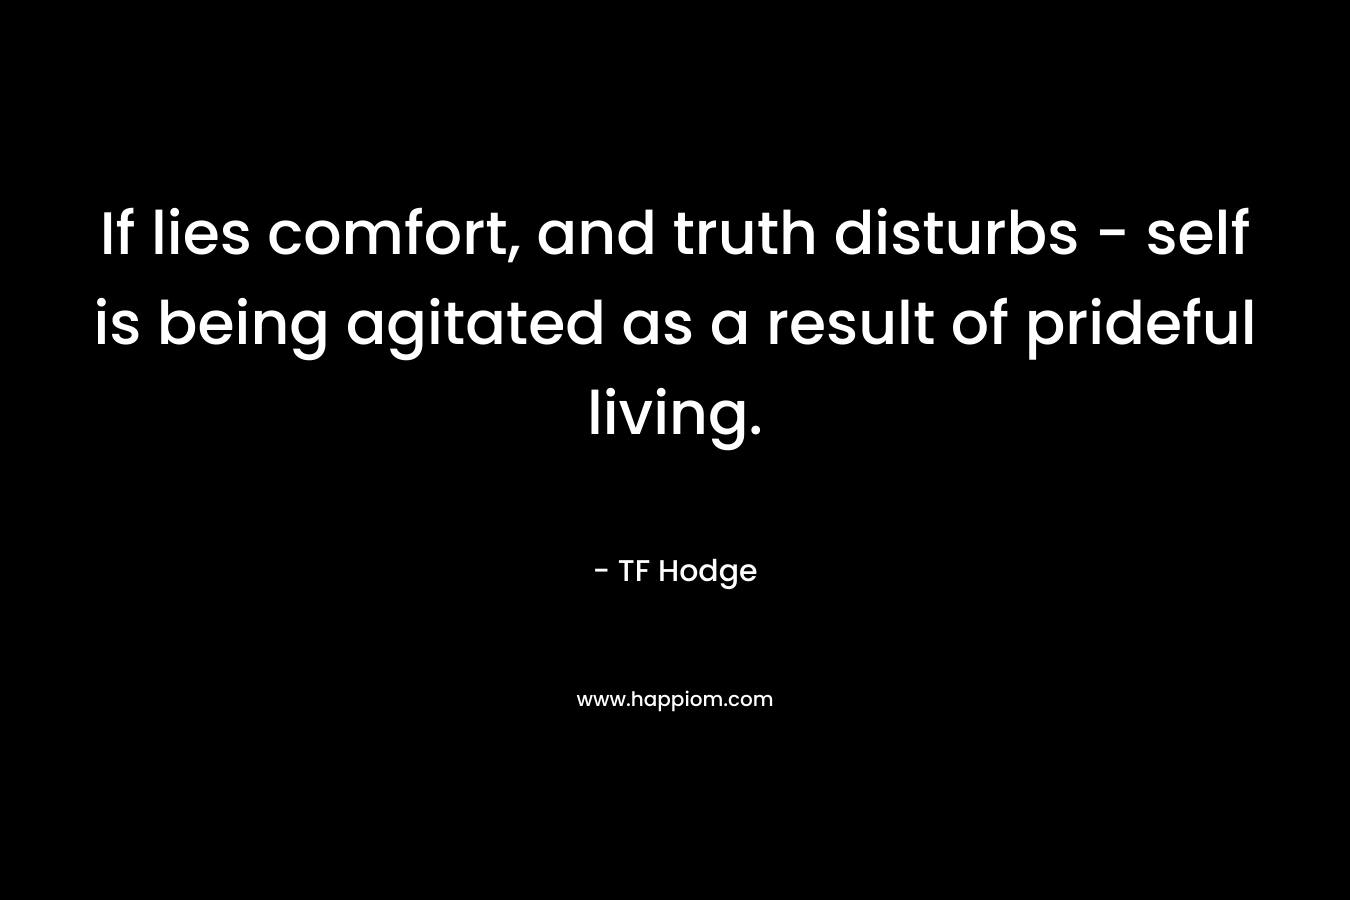 If lies comfort, and truth disturbs – self is being agitated as a result of prideful living. – TF Hodge